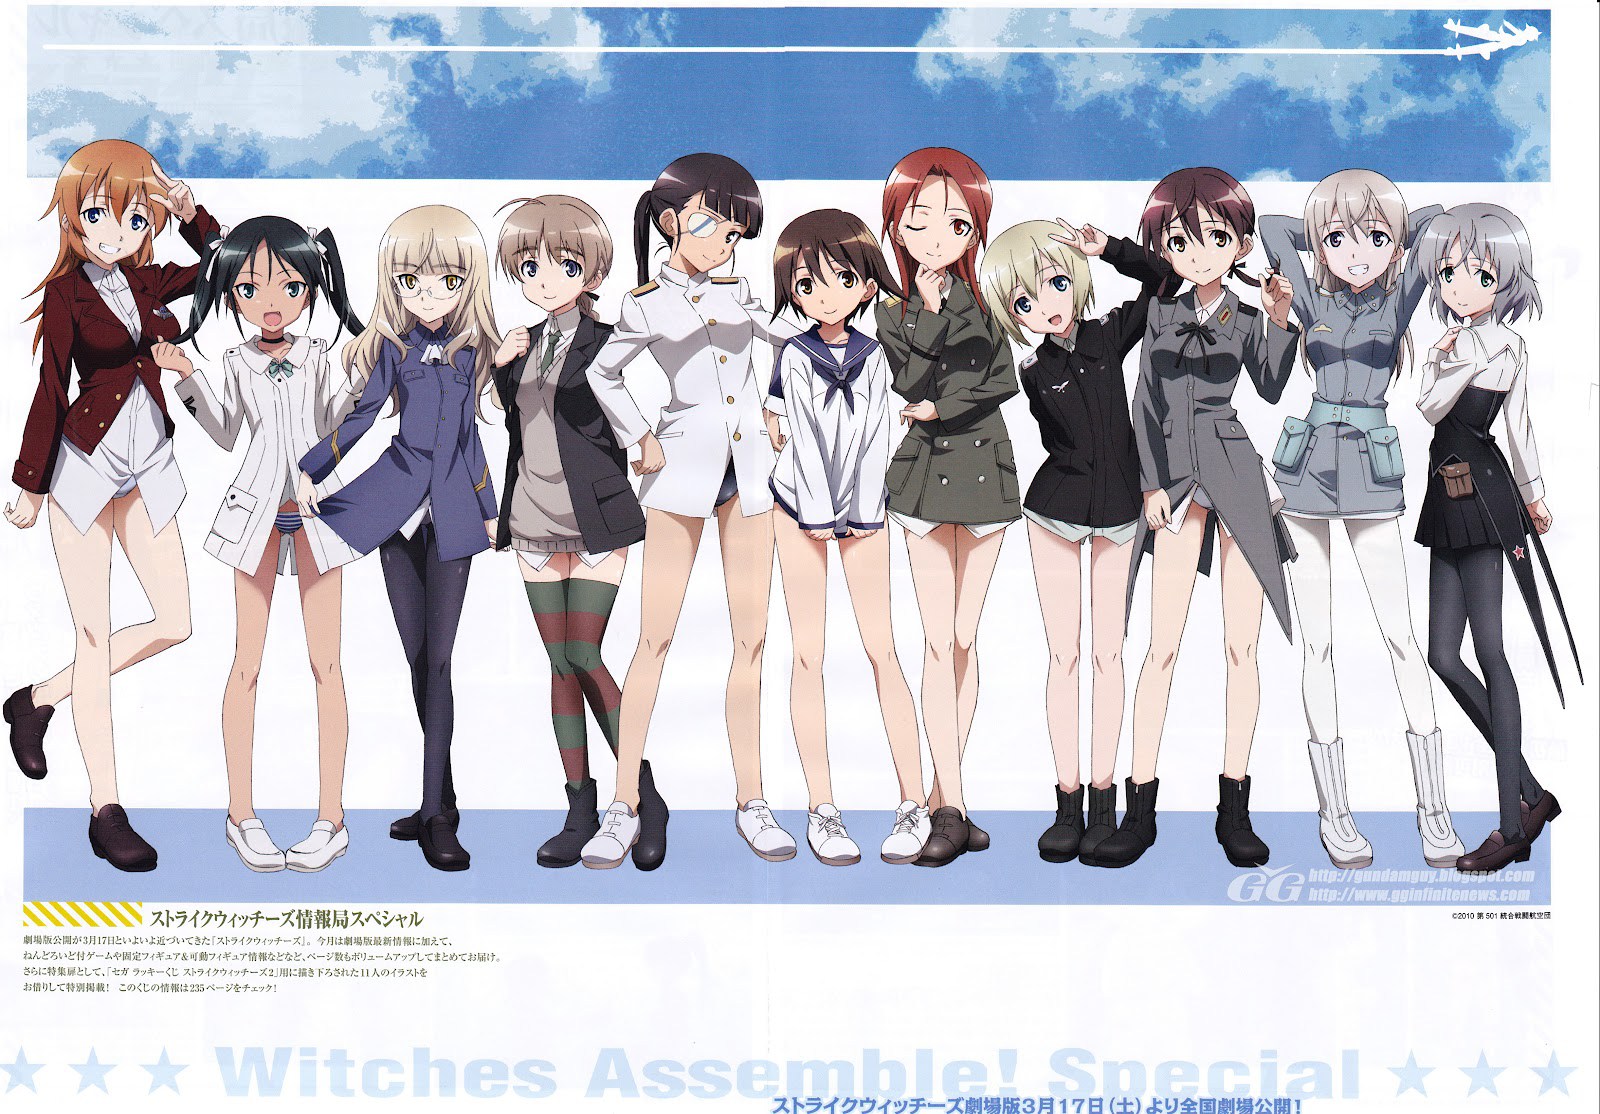 Images of Strike Witches | 1600x1114